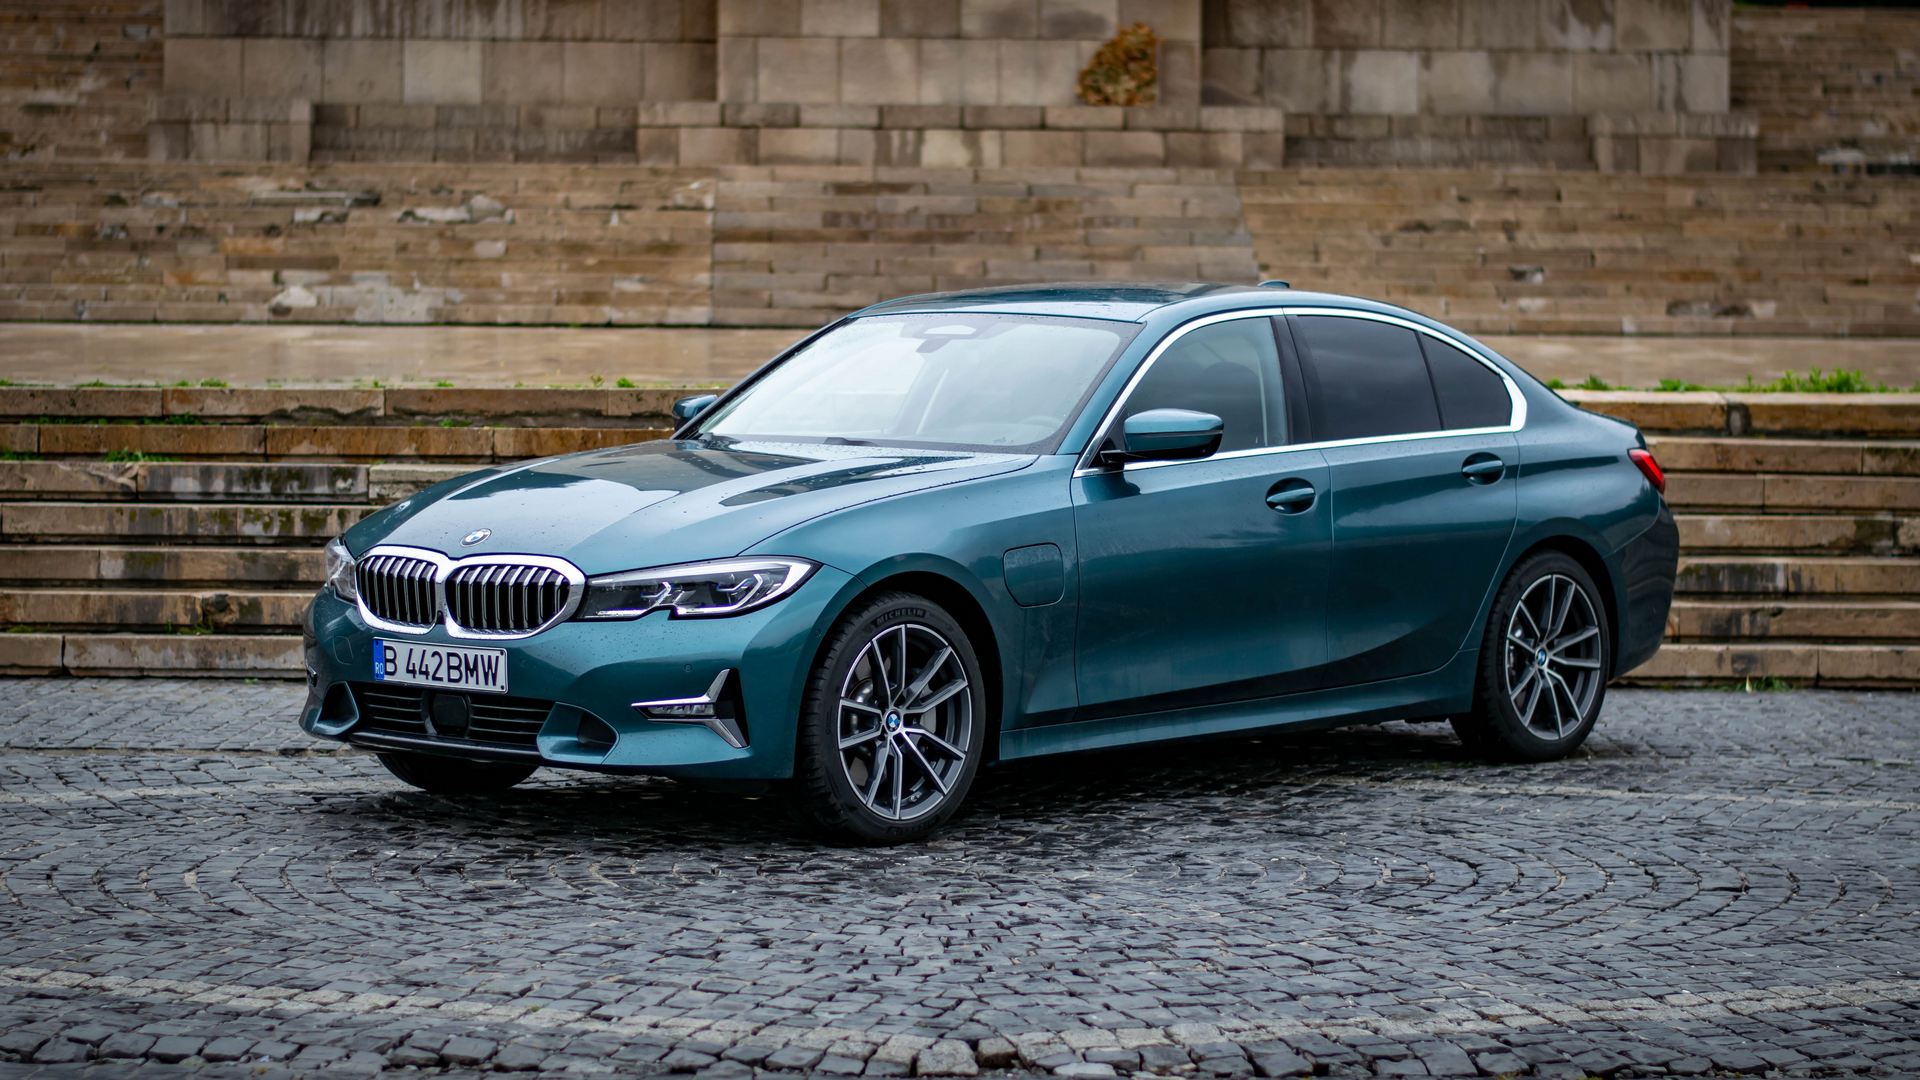 TEST DRIVE: 2021 BMW 330e Plug-In Hybrid – Use it wisely